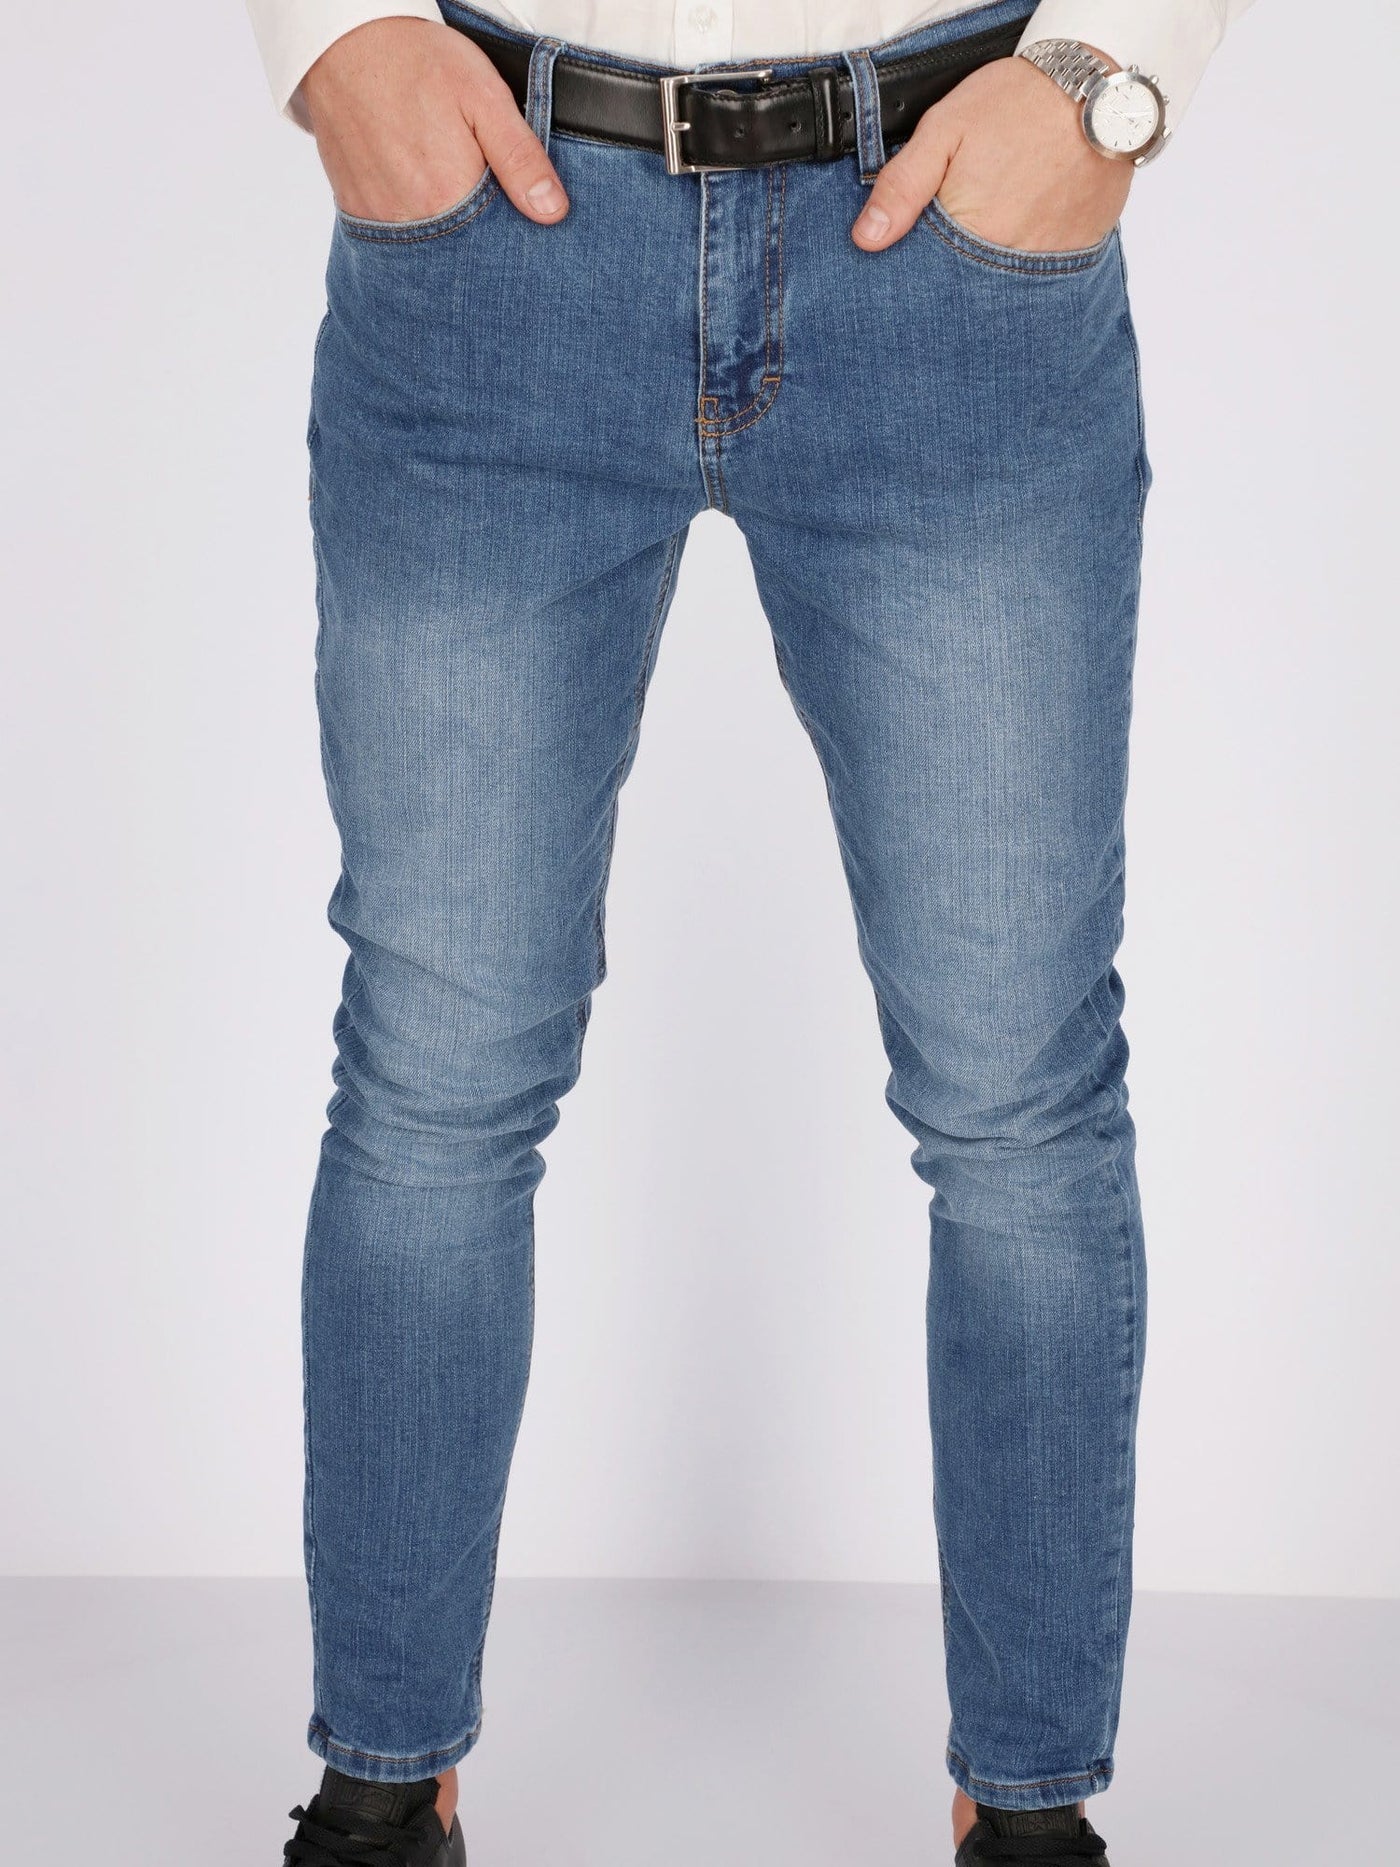 OR Pants & Shorts Wash Out Slim Fit Jeans